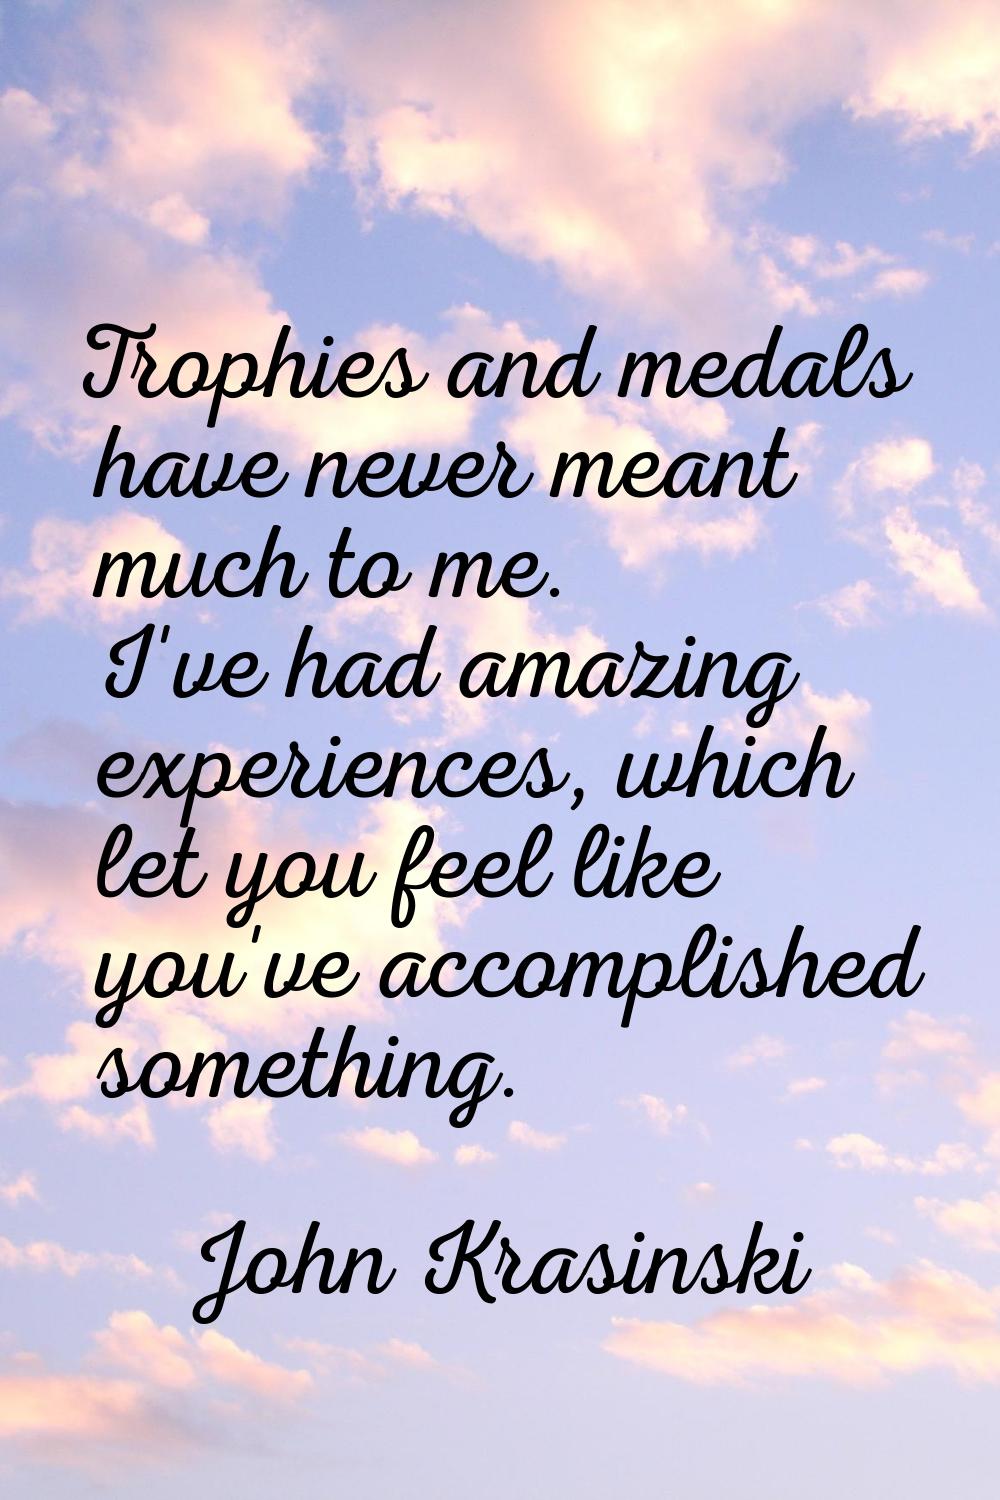 Trophies and medals have never meant much to me. I've had amazing experiences, which let you feel l